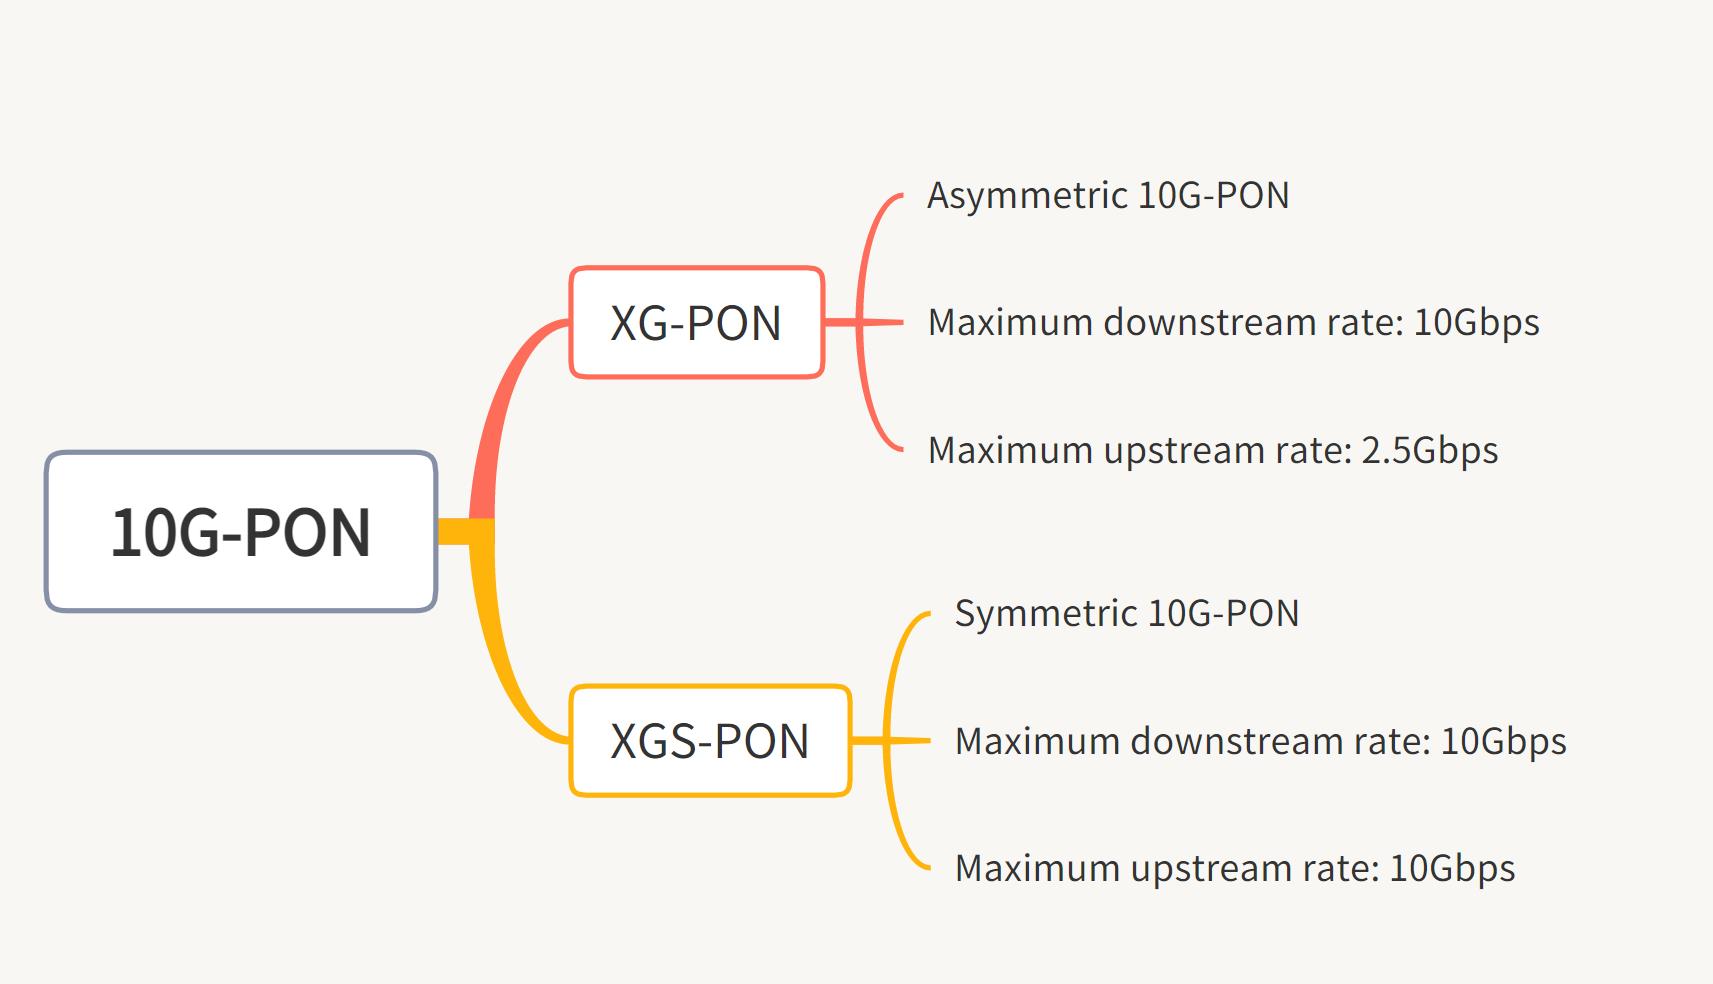 What are the differences between GPON, 10G-PON, XG-PON and XGS-PON?